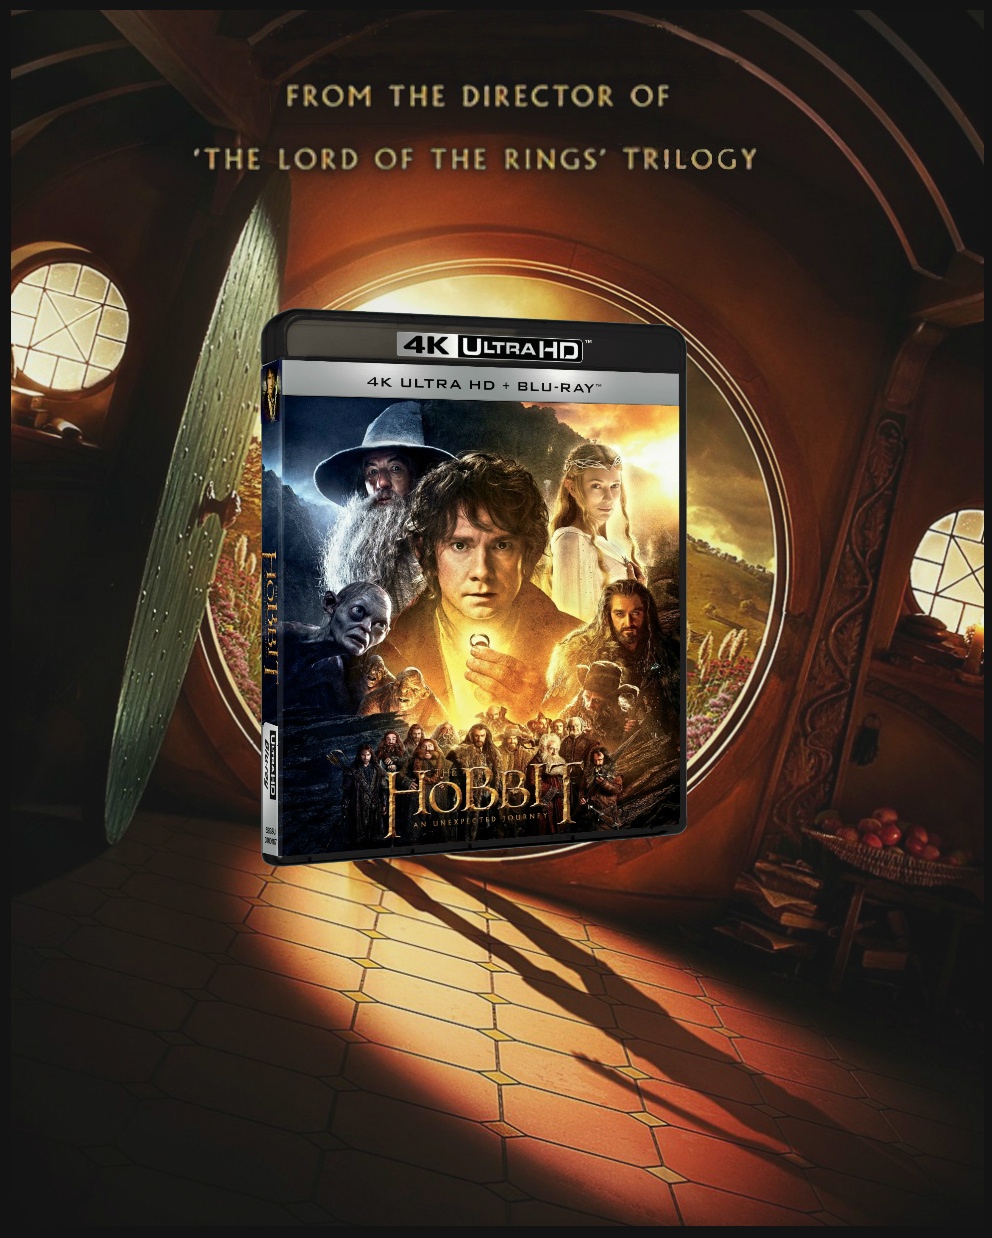 The Hobbit: An Unexpected Journey download the new version for android